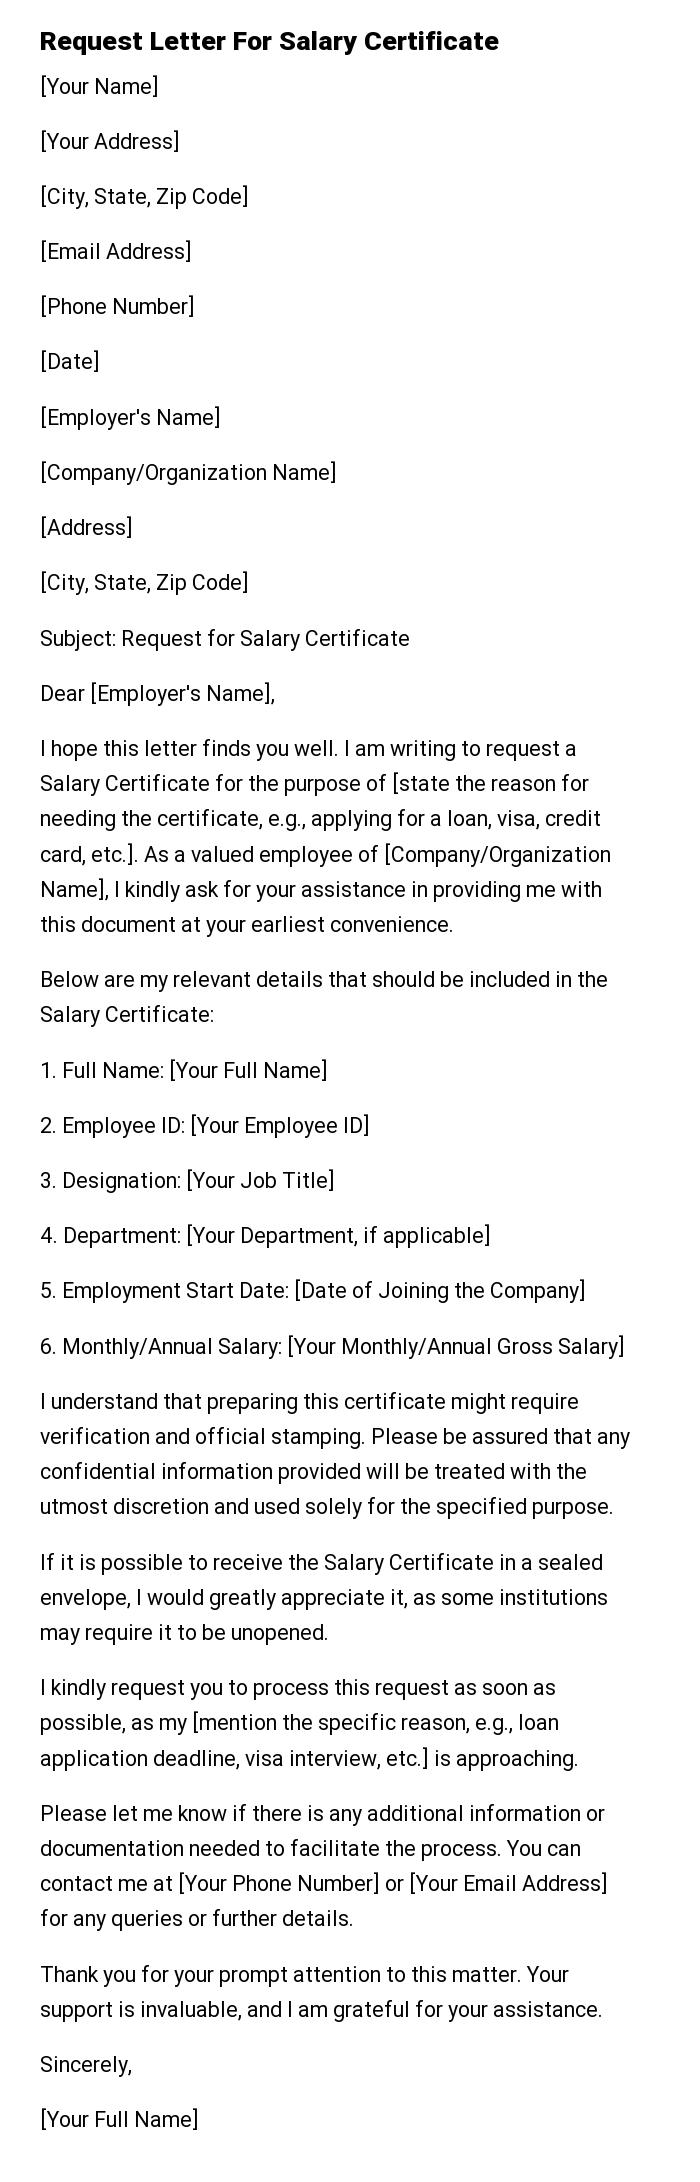 Request Letter For Salary Certificate